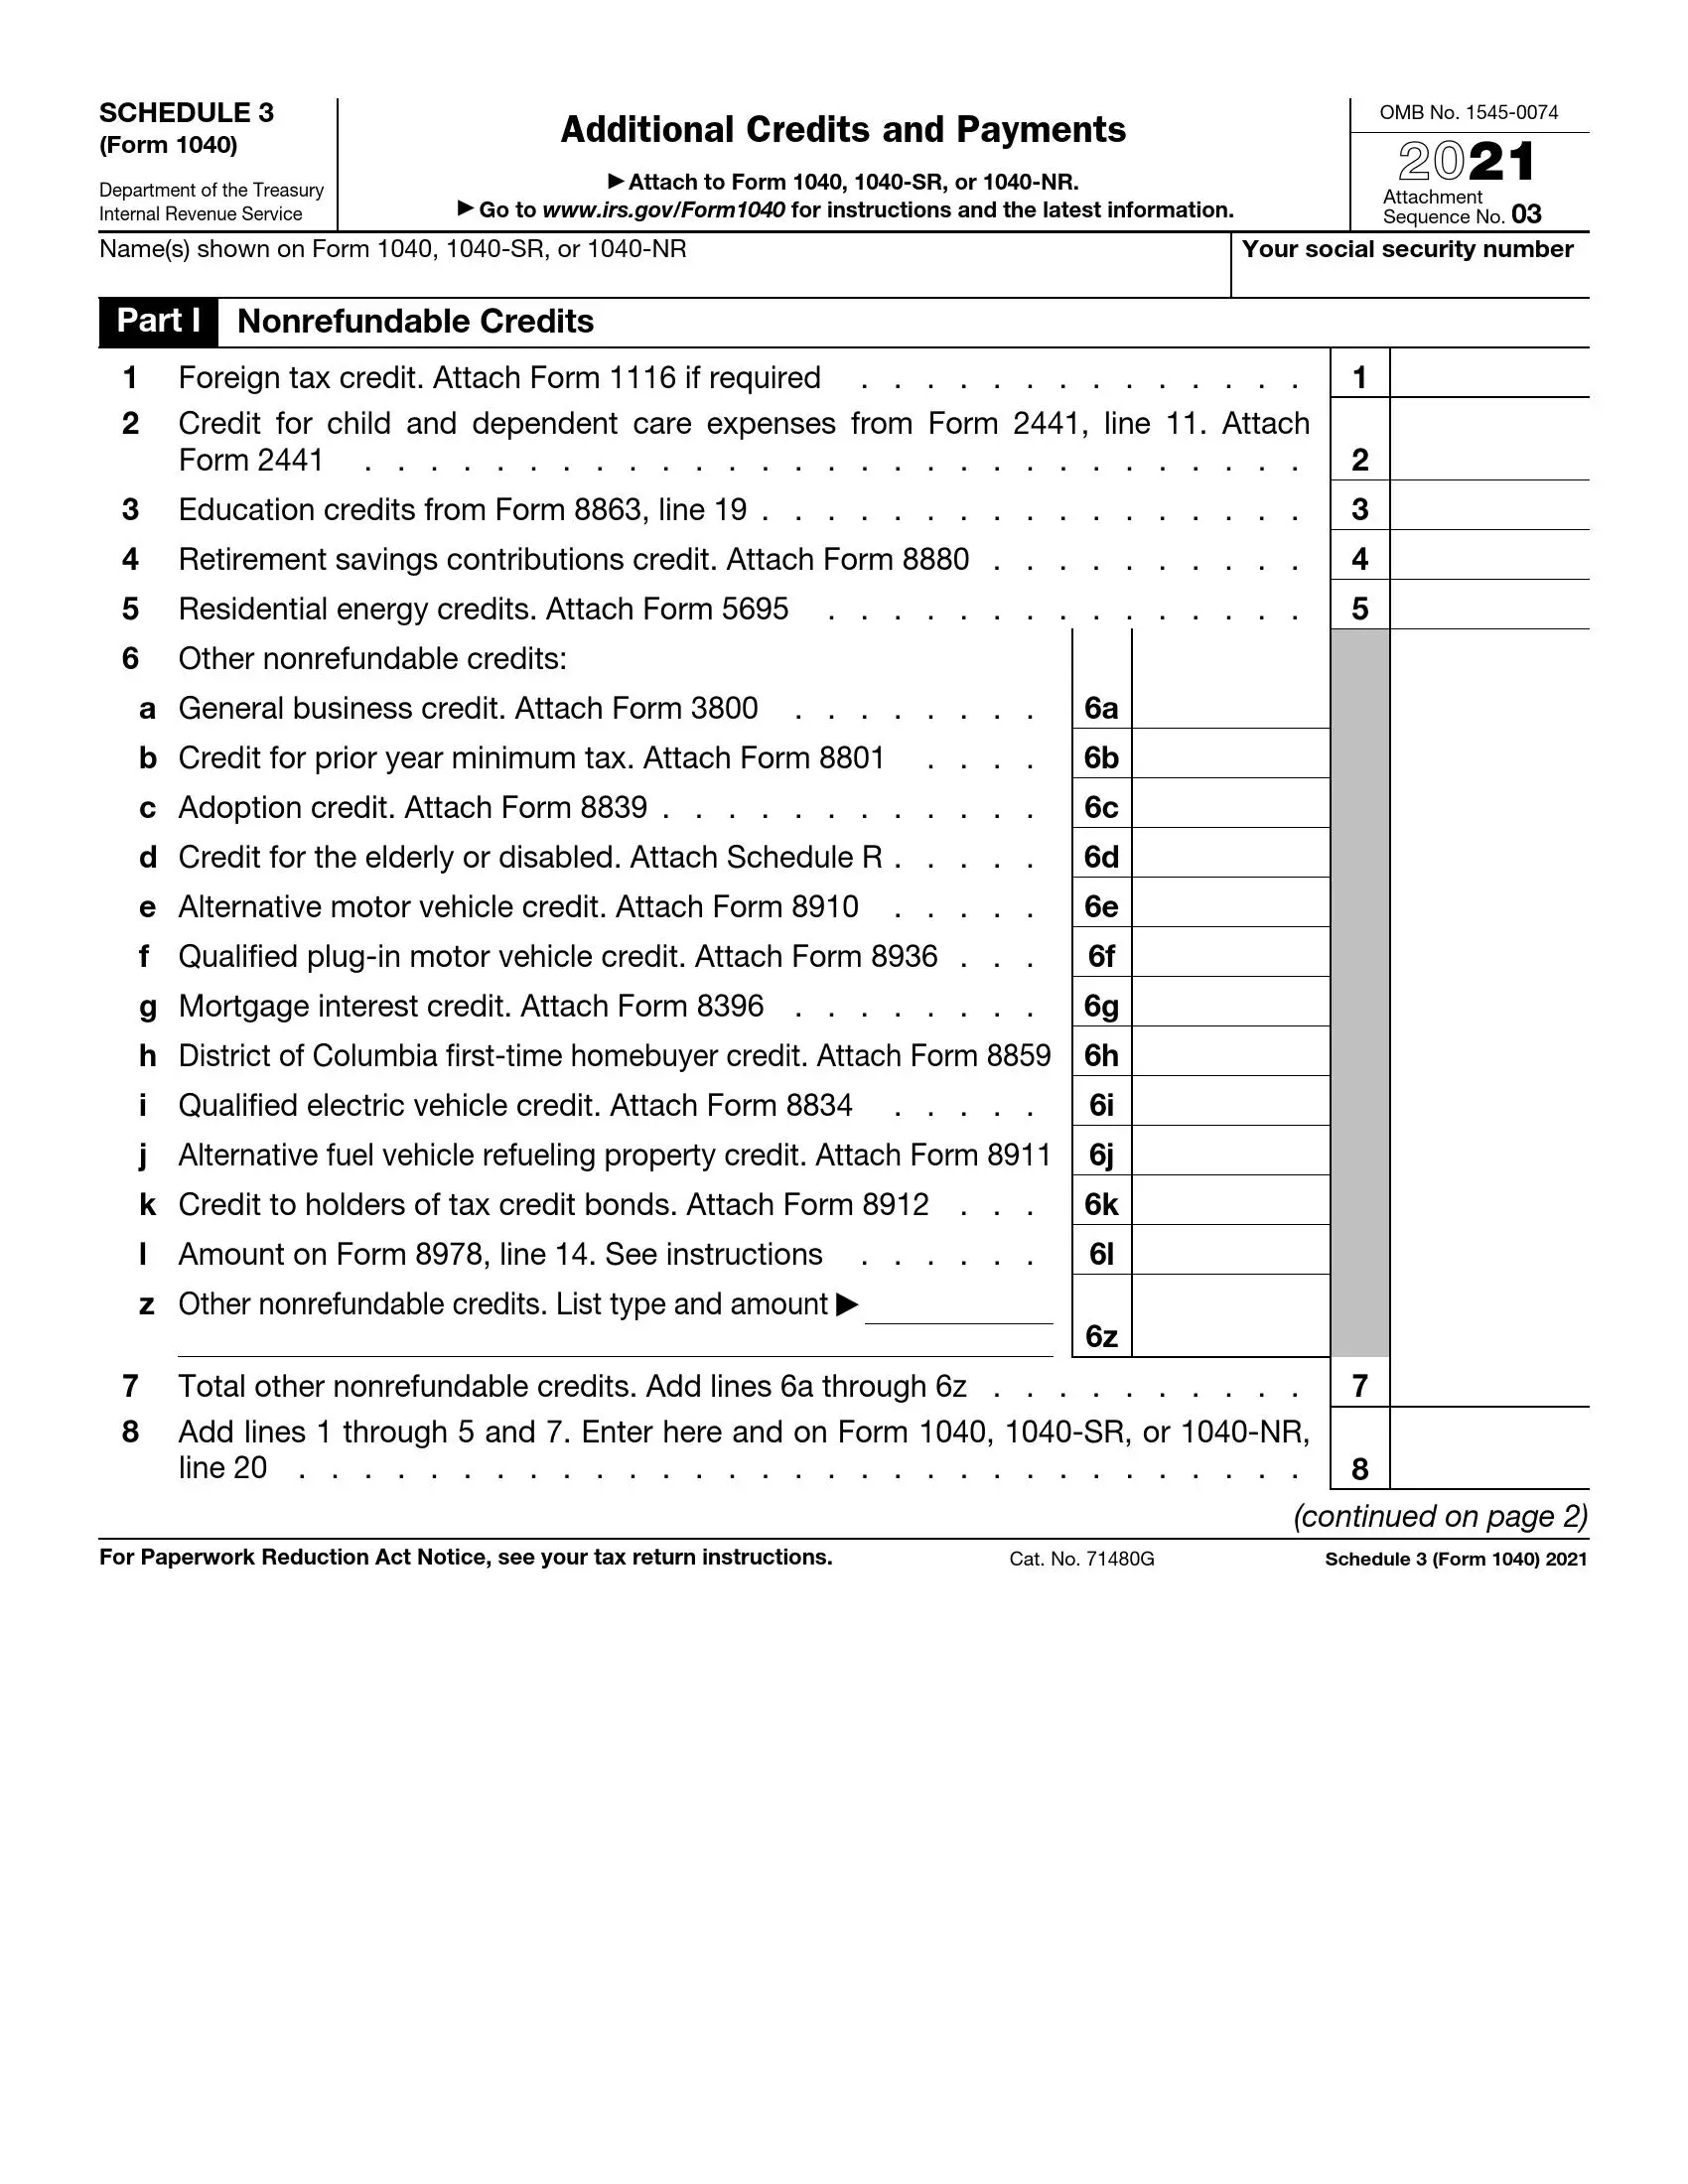 irs schedule 3 form 1040 or 1040 sr 2021 preview